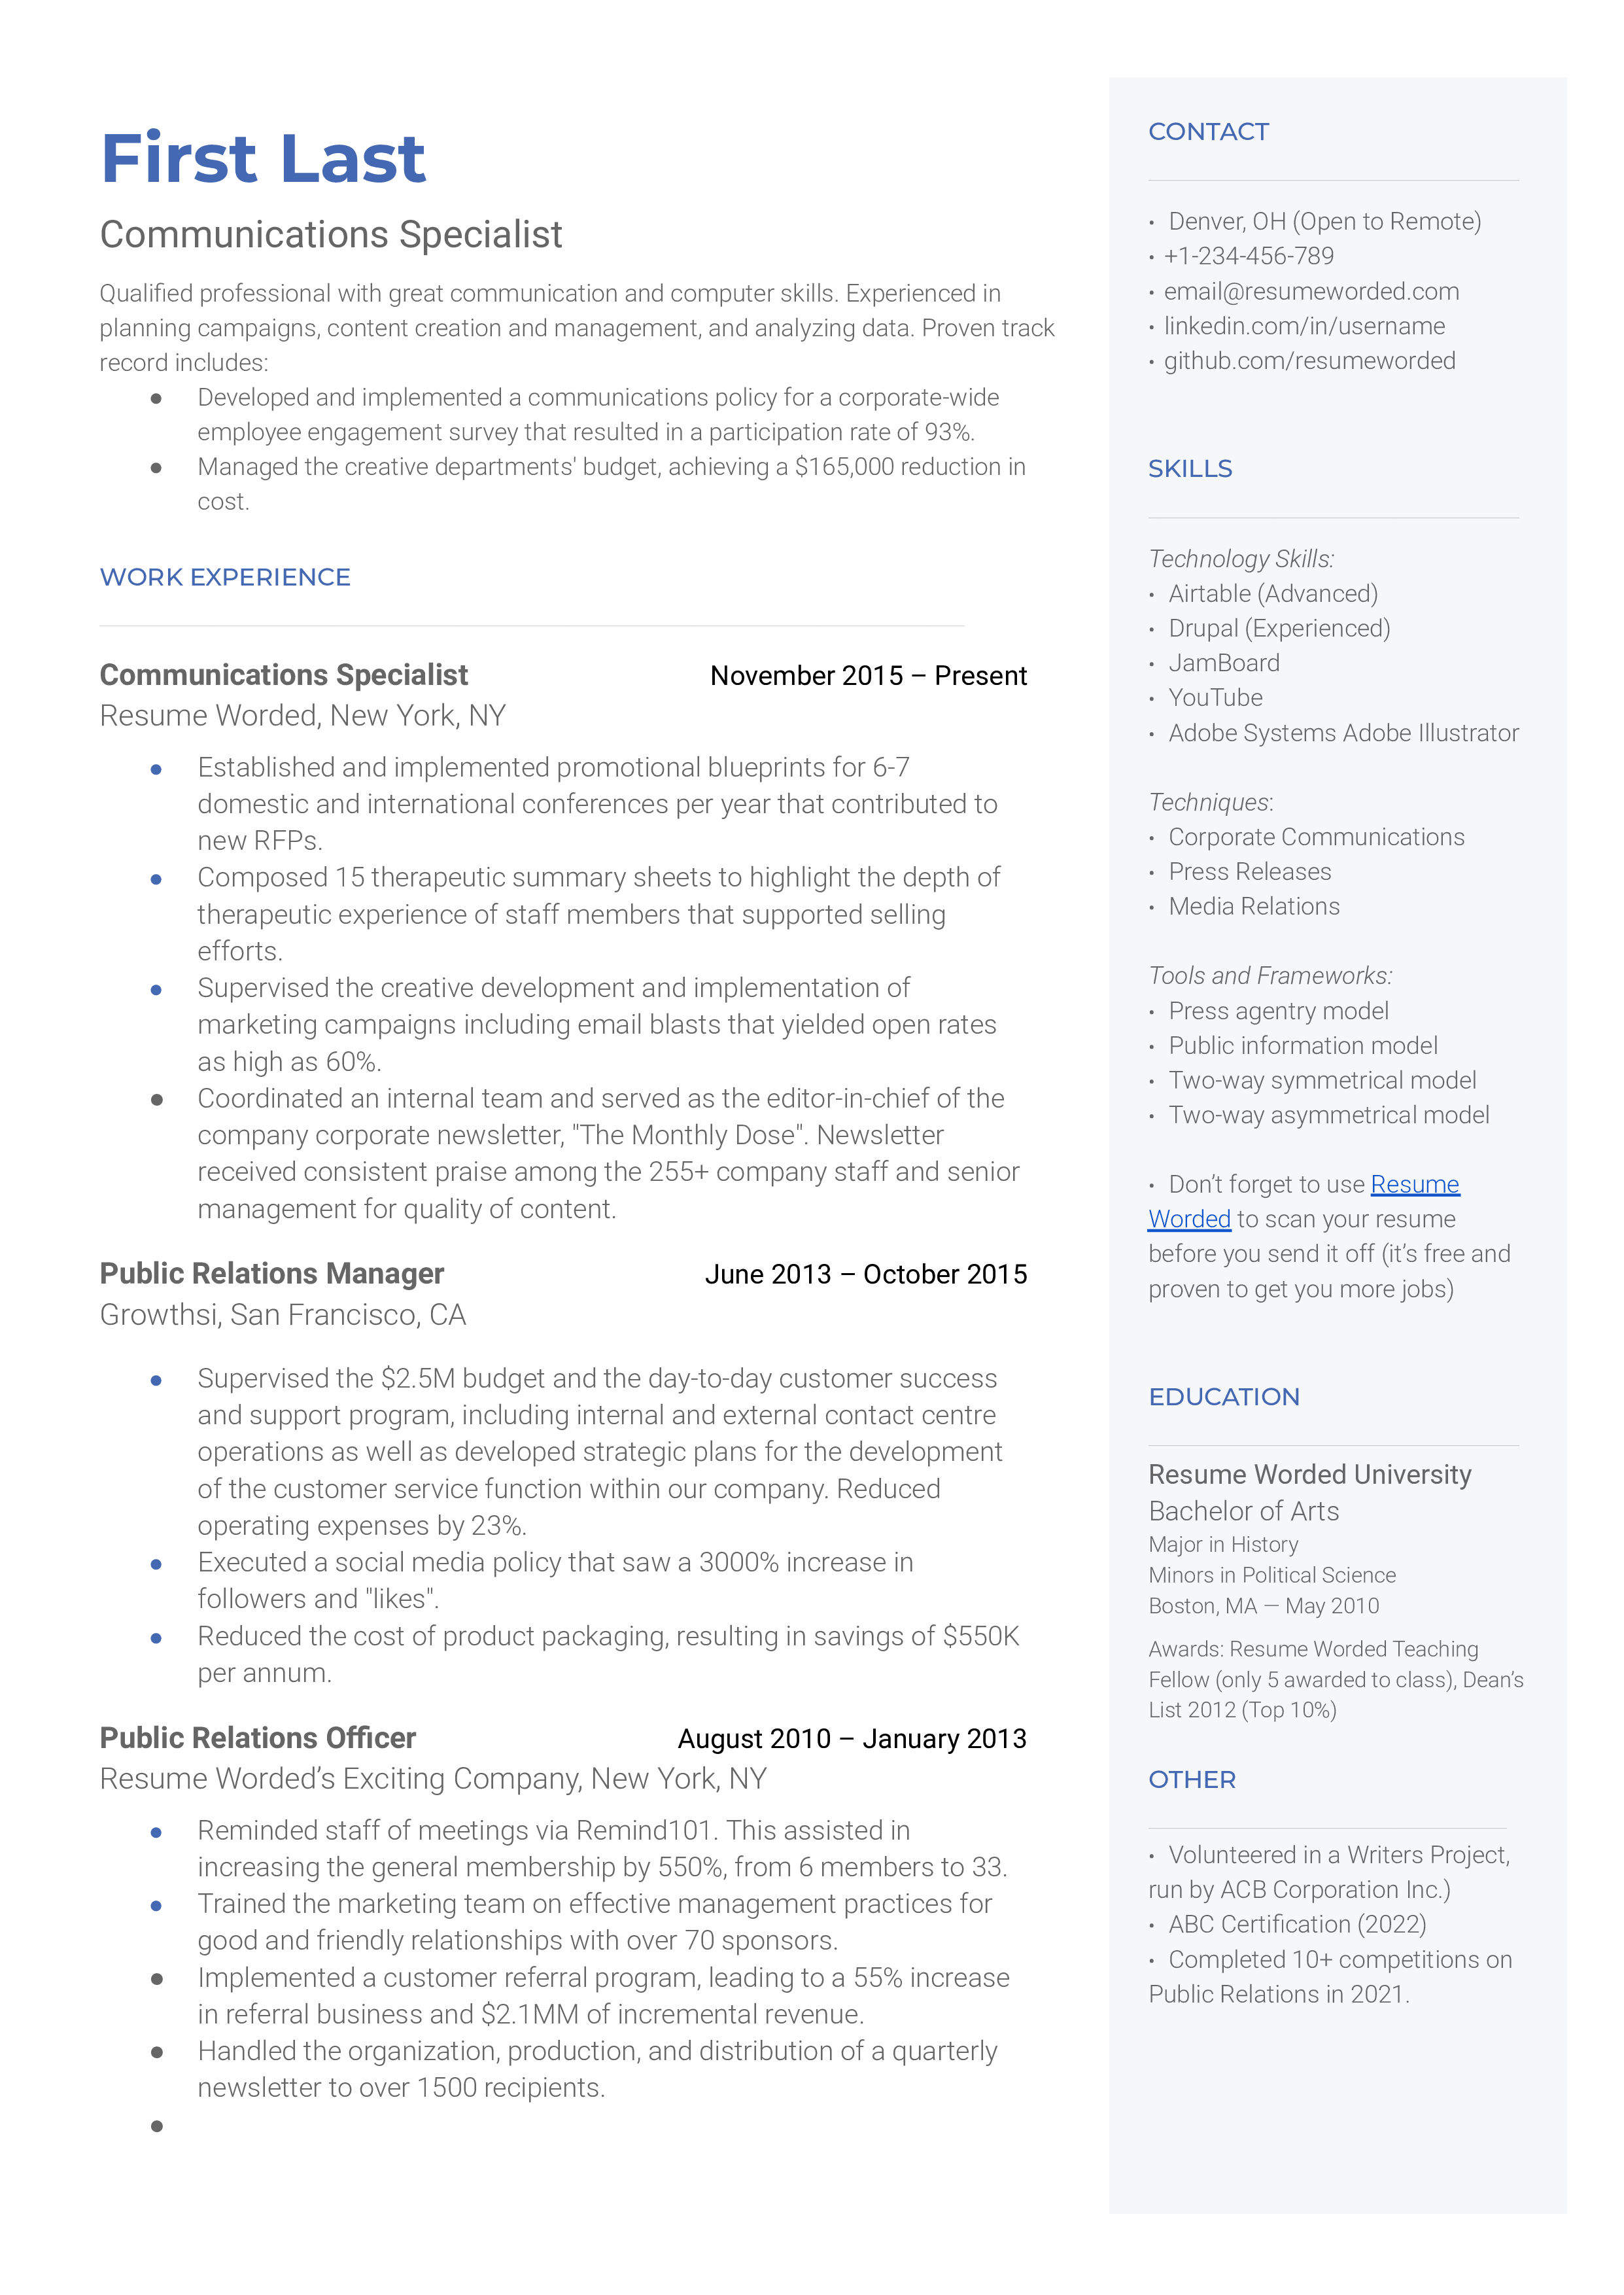 Communications Specialist Resume Template + Example